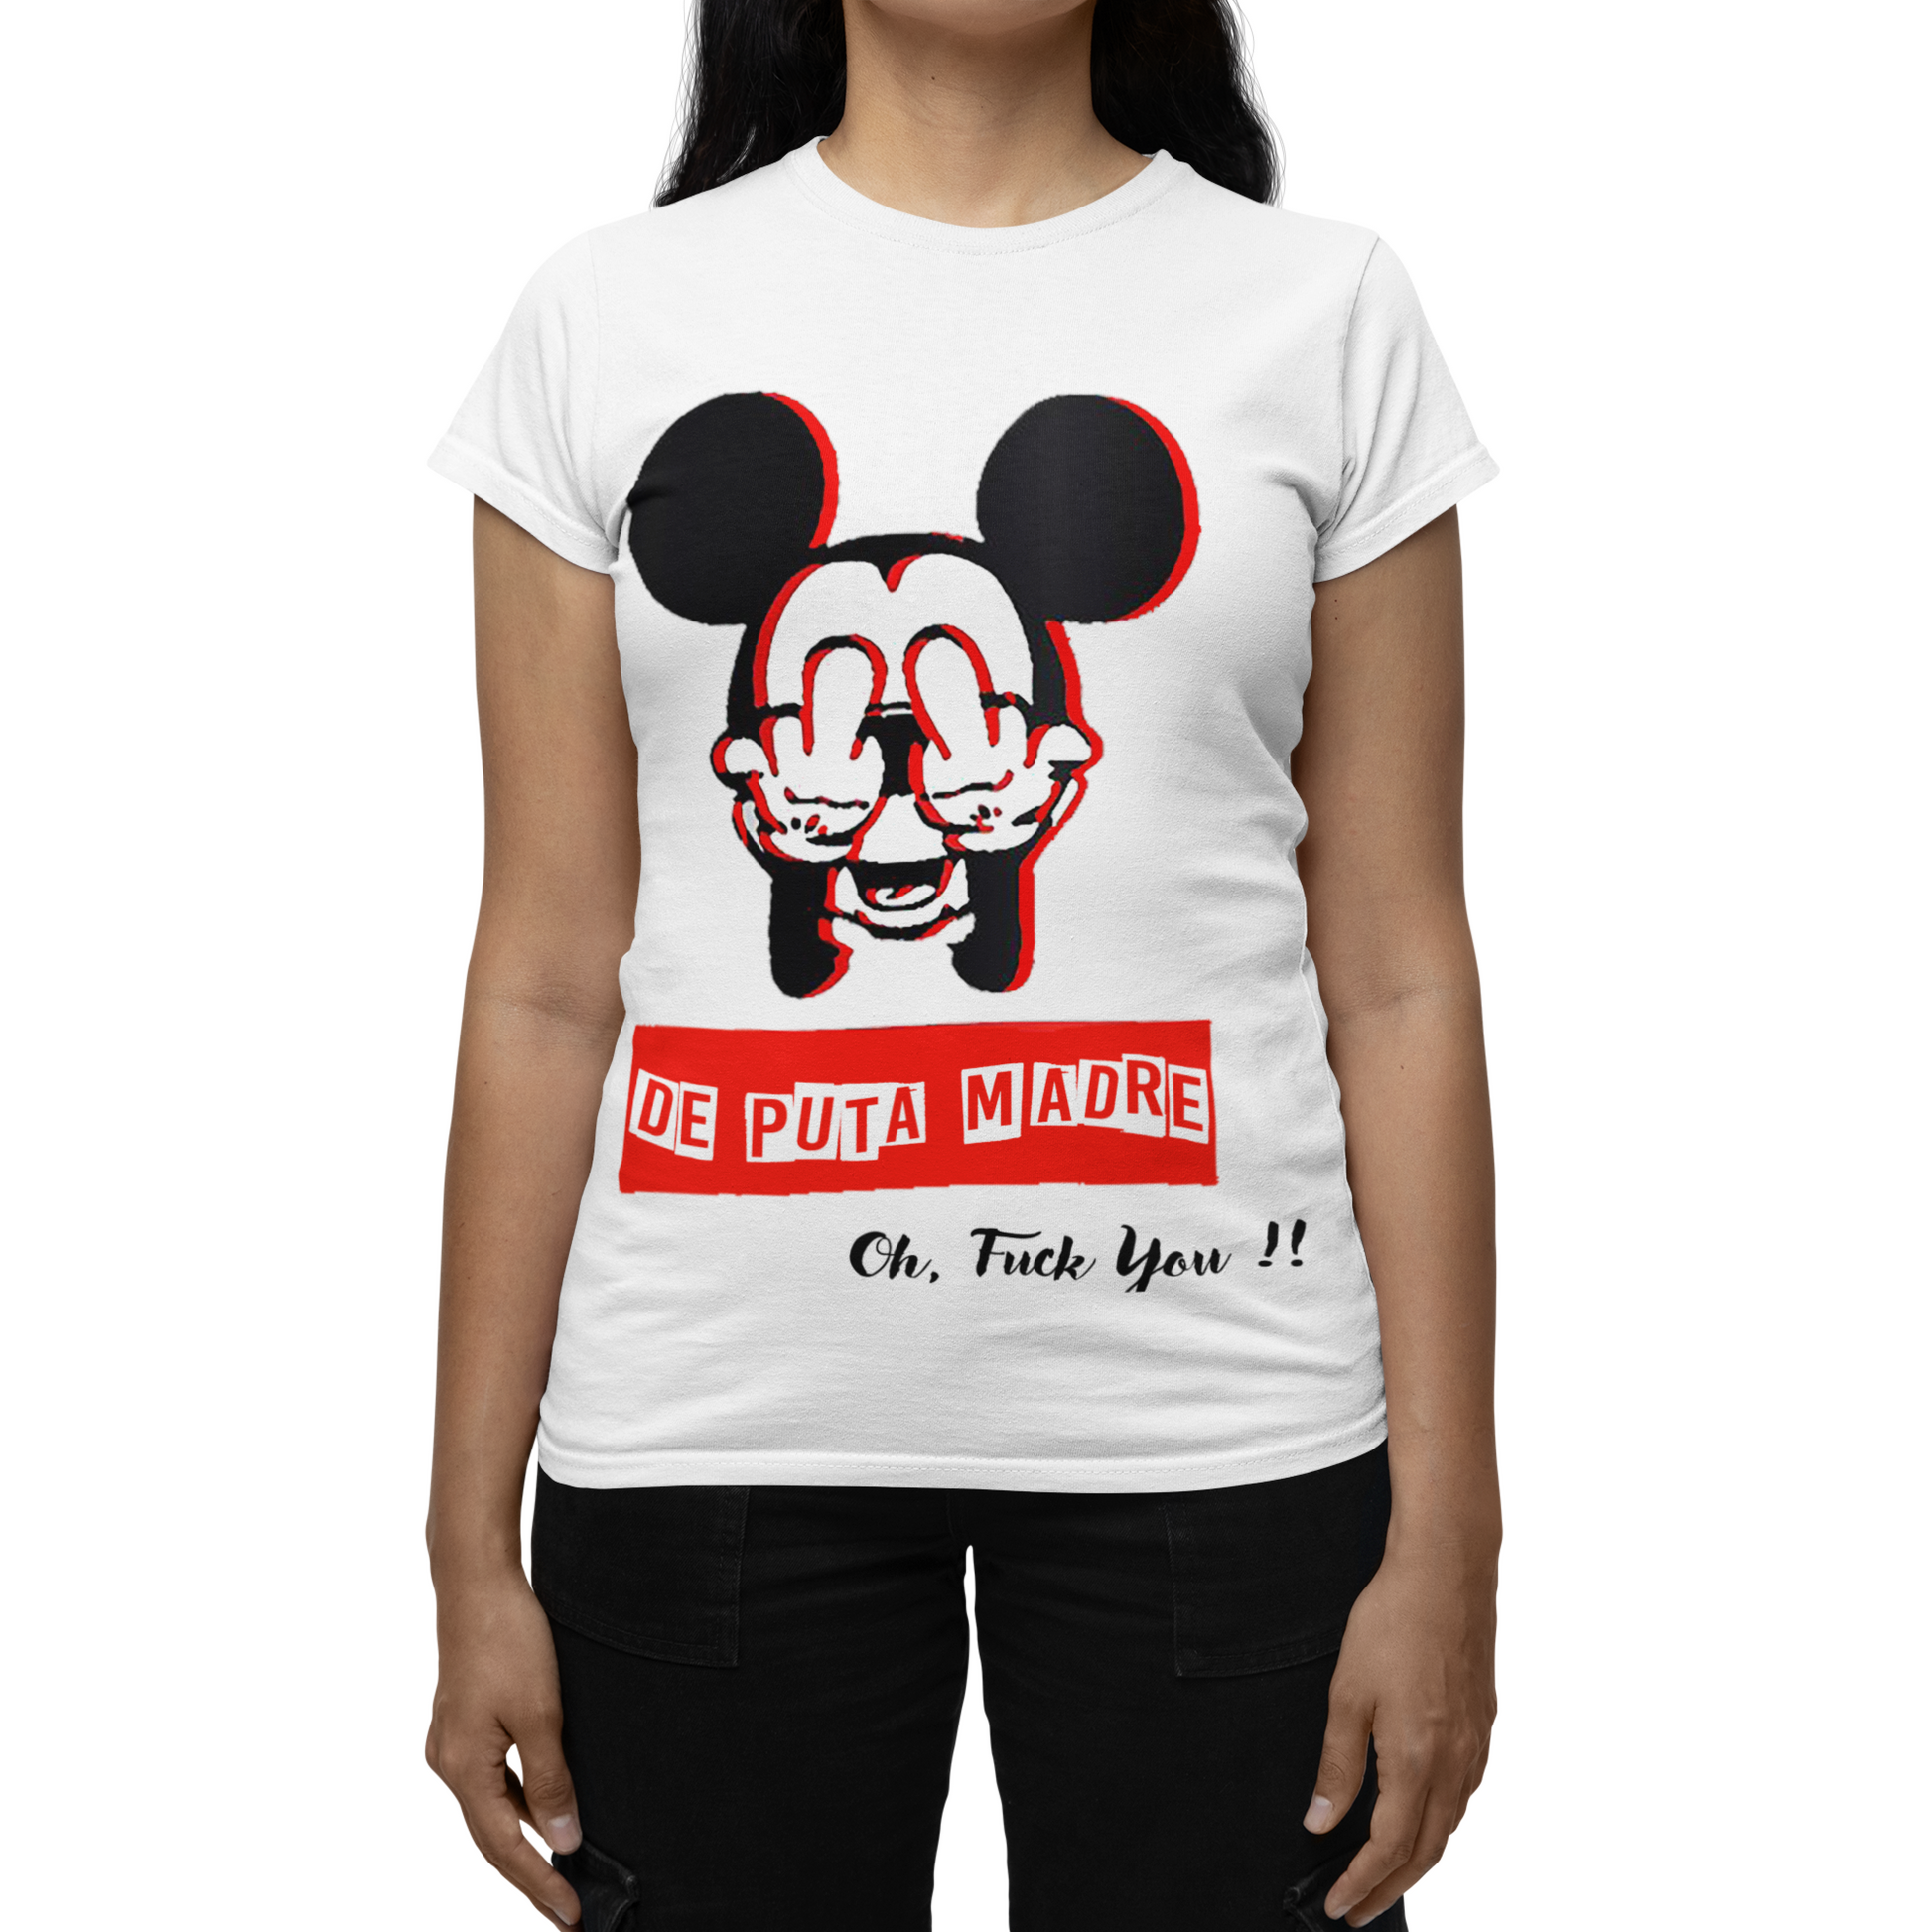 DPM69 Women's T-shirt F*ck You the Mickey Mouse